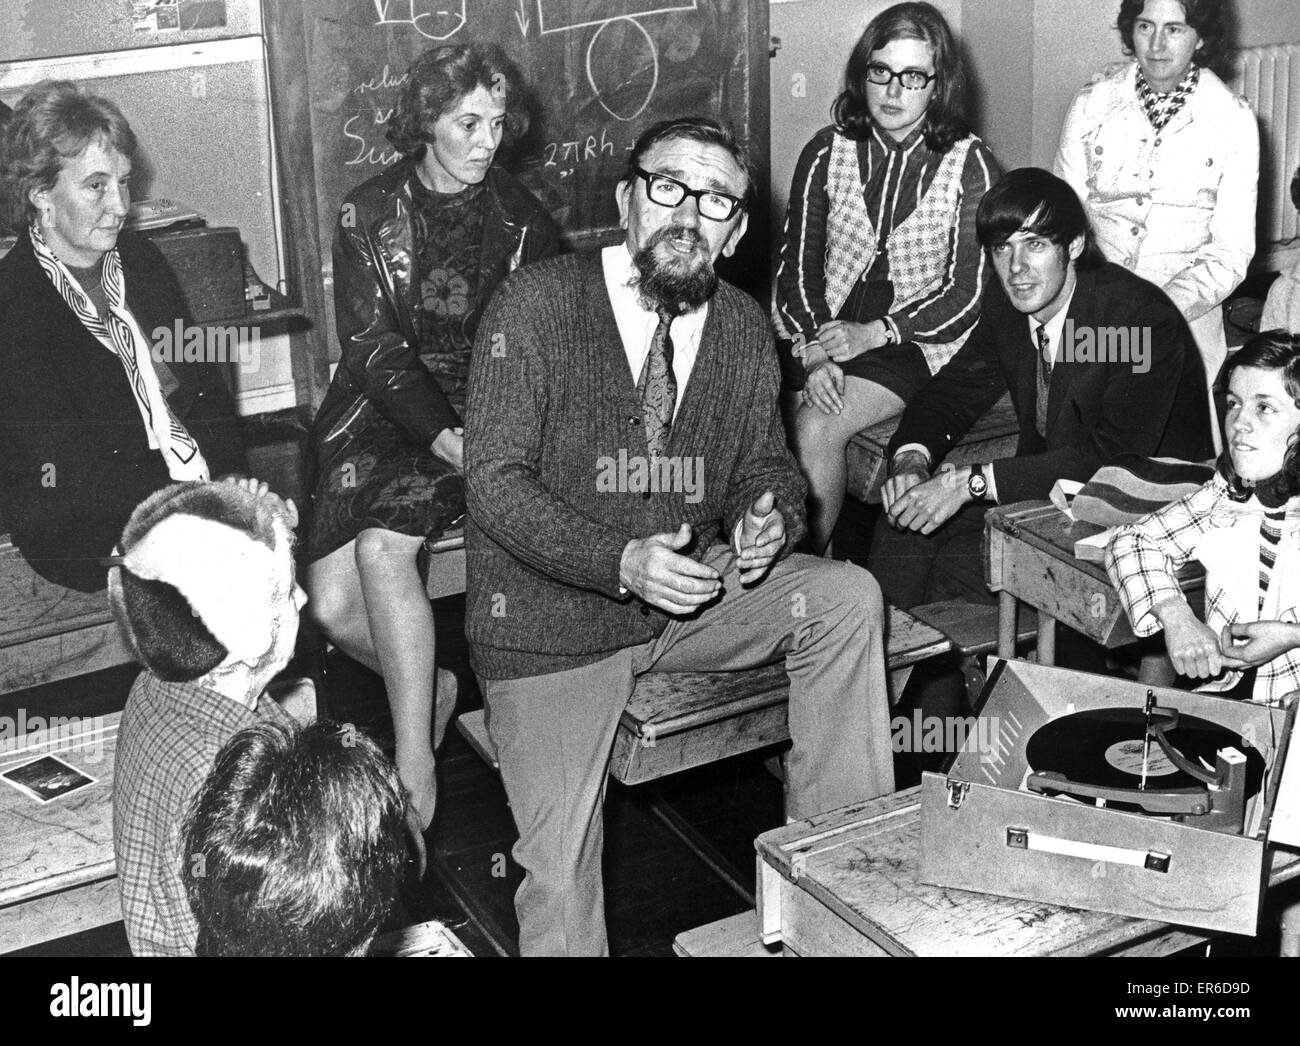 Evening classes at East Kilbride High School gets free entertainment from folk singers Matt McGinn during his lectures on 'Folk'. 9th October 1972. Stock Photo